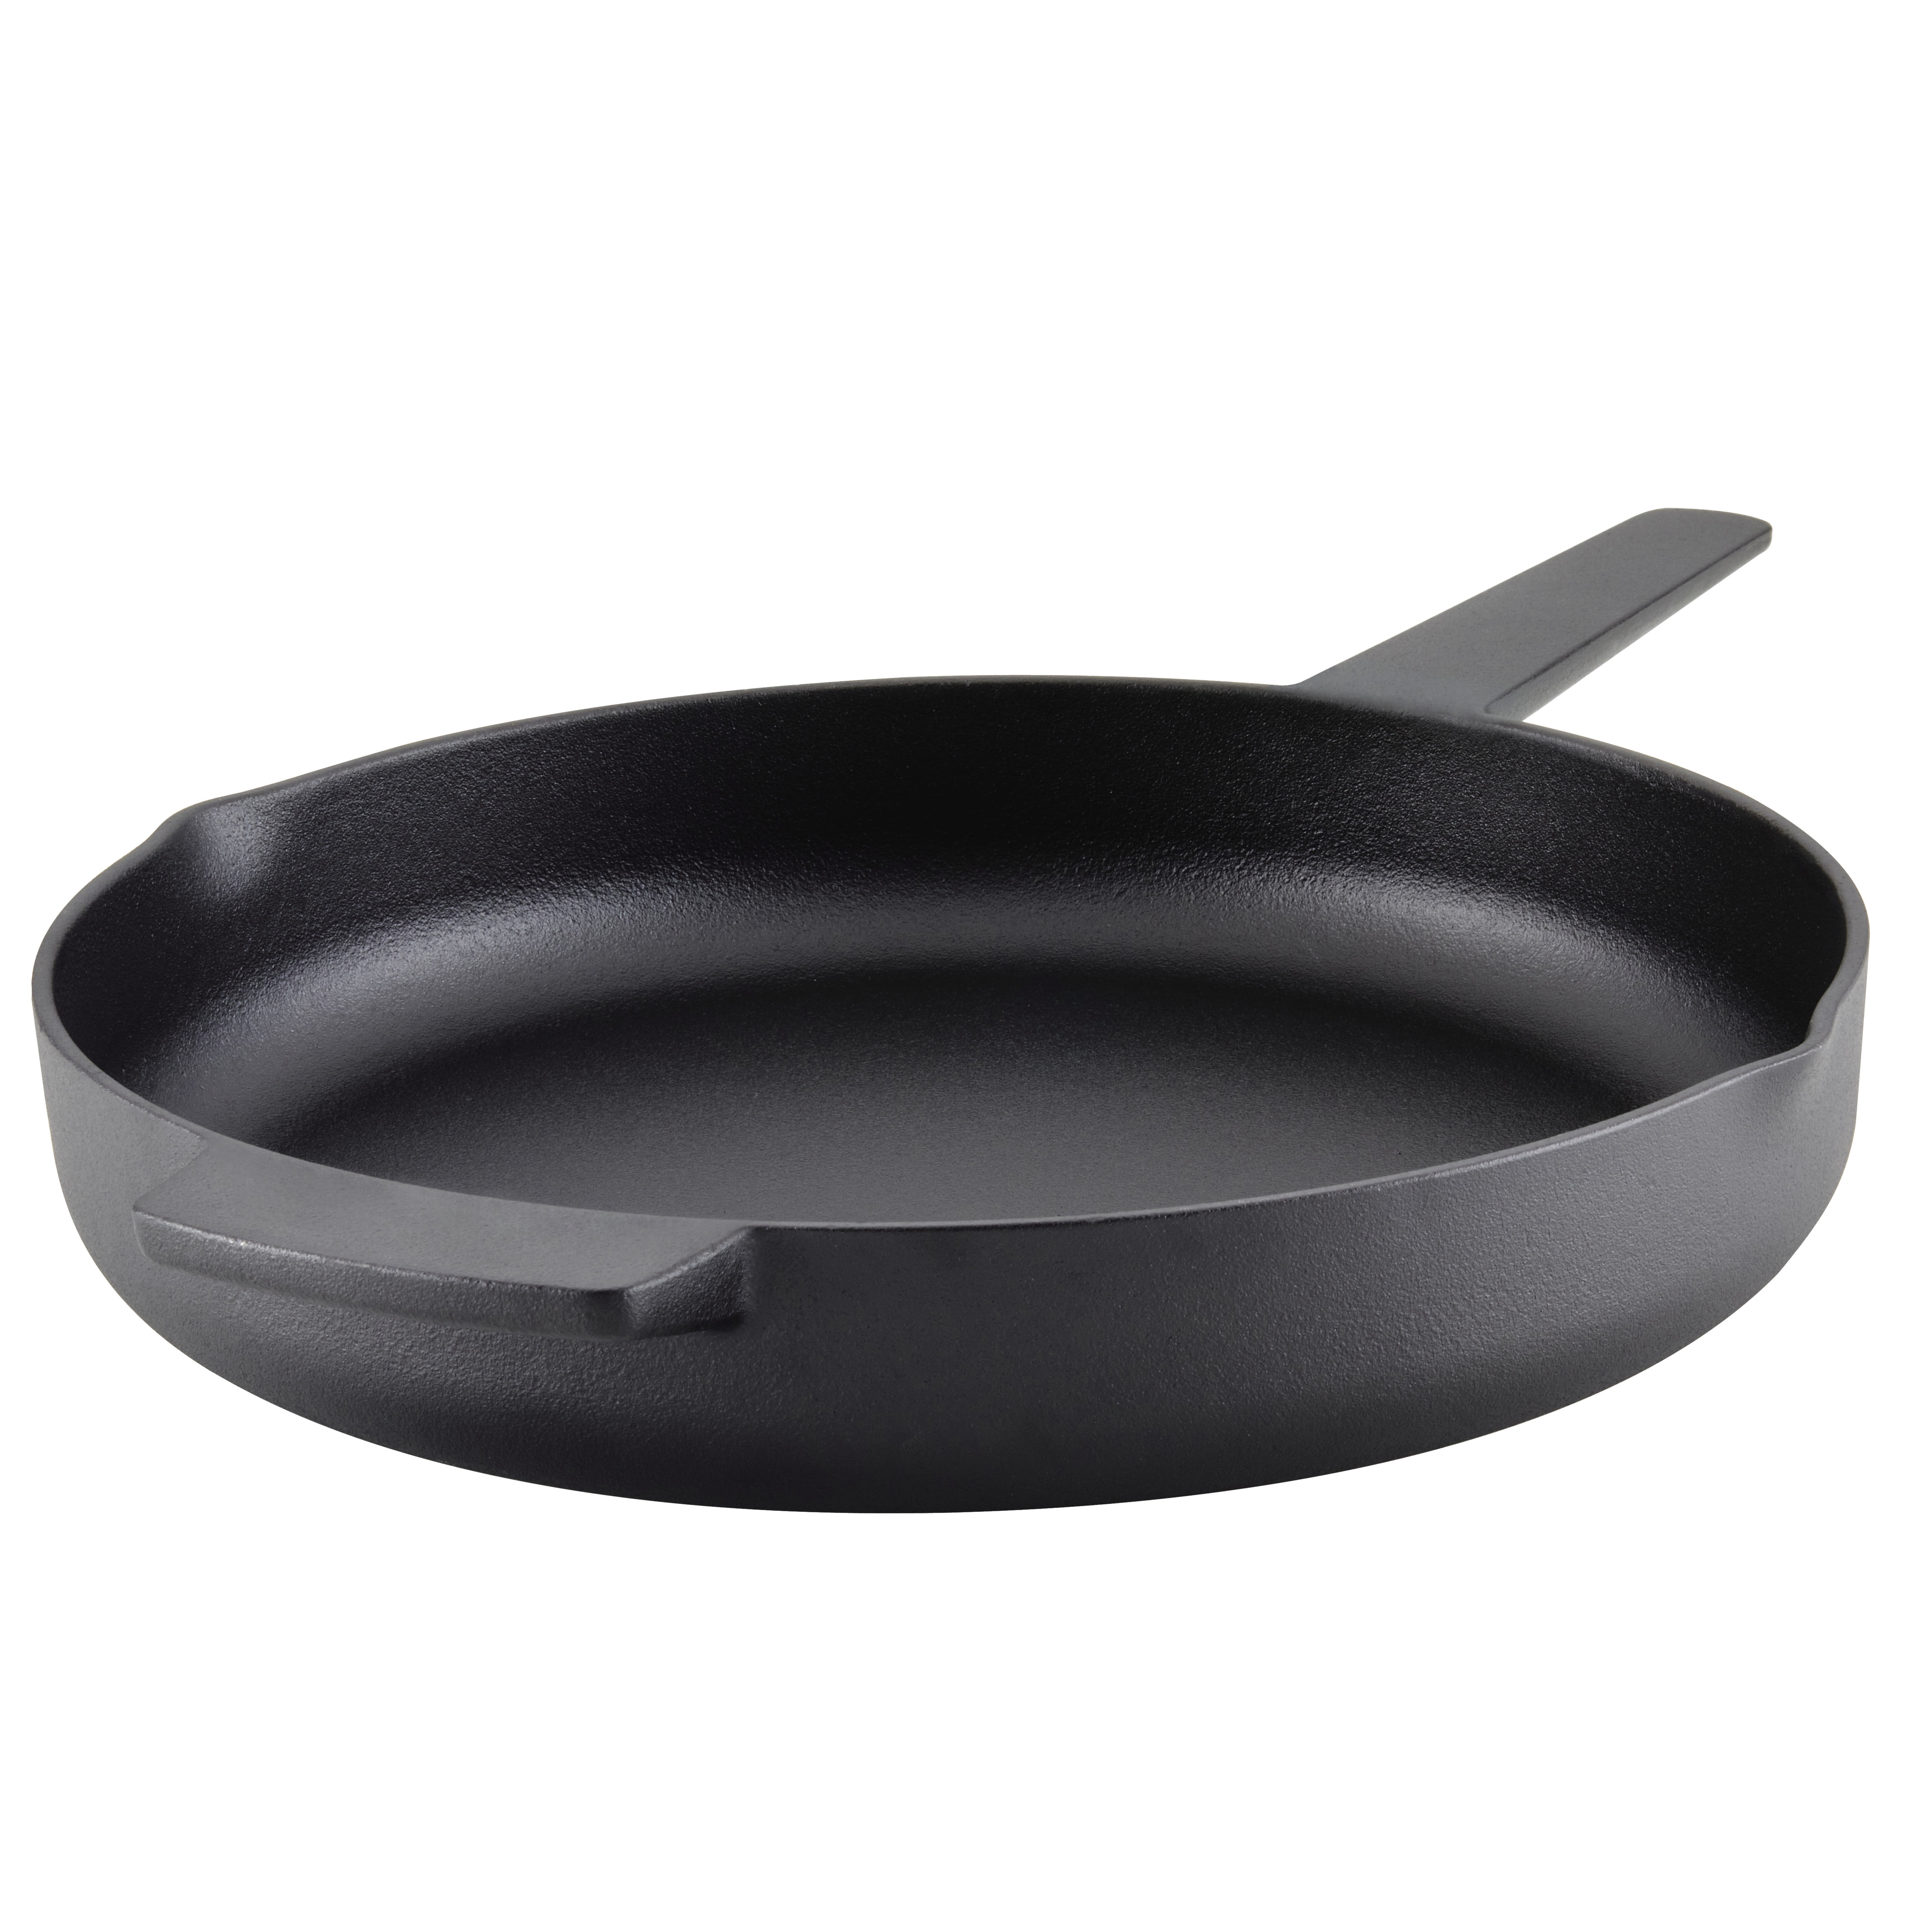 Classic Cuisine 12 in. Cast Iron Skillet in Black with Pour Spout HW031012  - The Home Depot